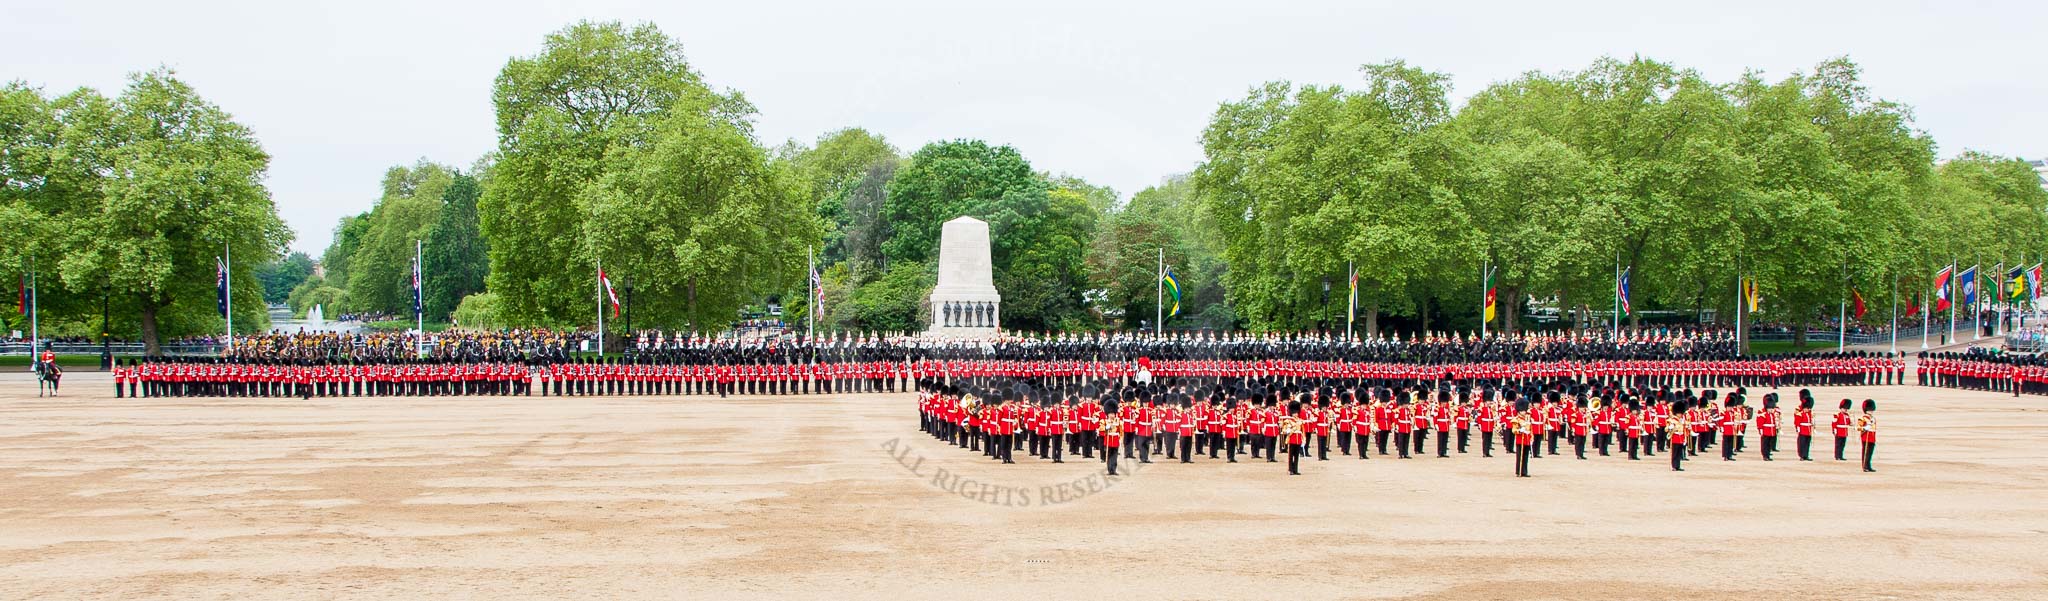 Major General's Review 2013: At the end of the March Past in Quick Time, all five guards on the northern side of Horse Guards Parade peform a ninety-degree-turn at the same time..
Horse Guards Parade, Westminster,
London SW1,

United Kingdom,
on 01 June 2013 at 11:47, image #561